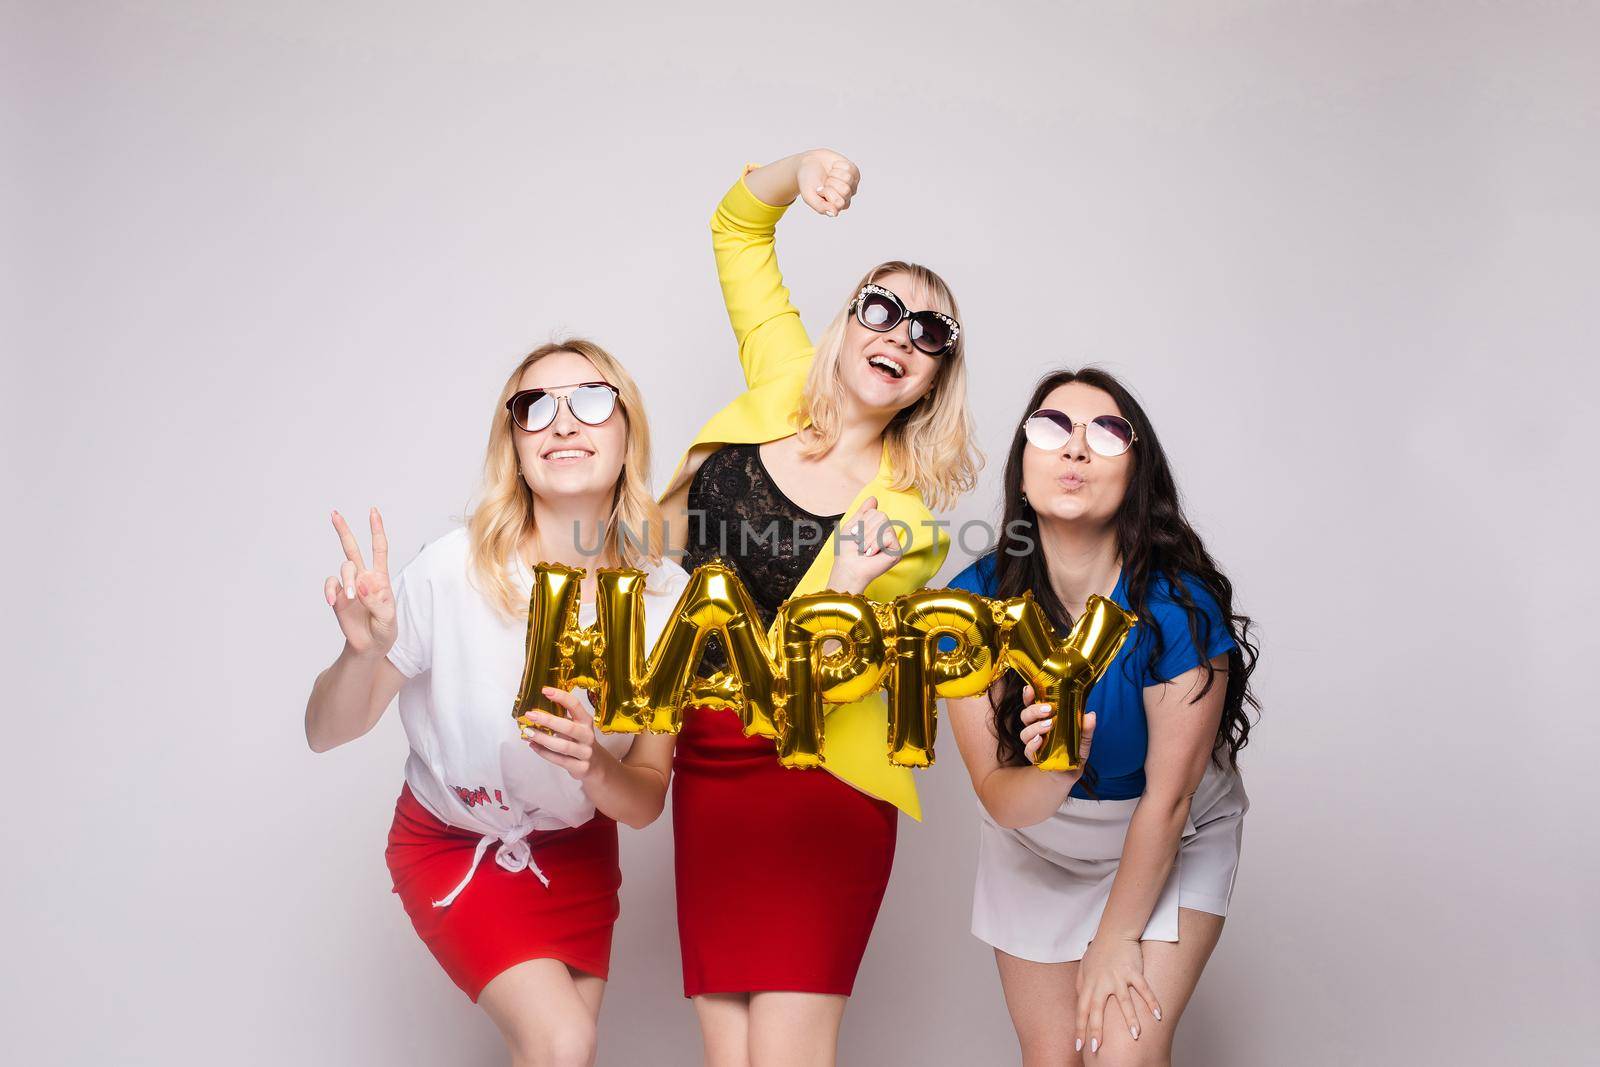 Three happy girls keeping balloons, laughing and looking at camera on grey isolated background in studio. Cheerful women celebrating birthday party and posing. Concept of holiday and happiness.